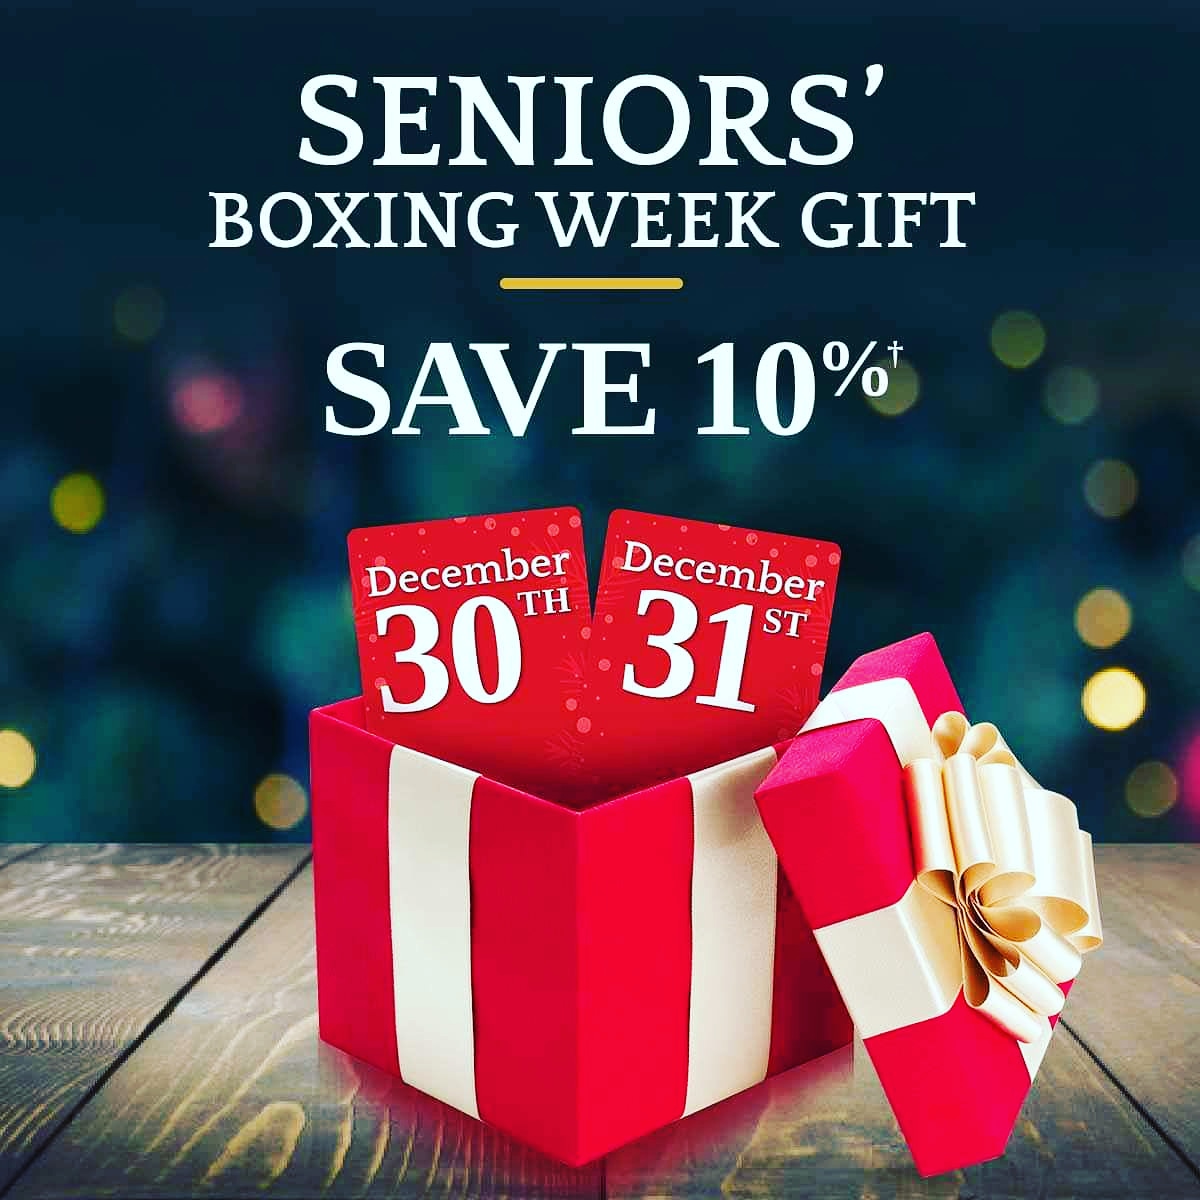 Don't get left out in the cold this #SeniorsDay #MilitaryDay #Today and #Tomorrow #PetParents over 60 get 10% off all regularly priced items at #BosleysOakBay #LocallyOwnedandOperated #SupportLocalOakBay #SupportLocalVictoria #supportsmallbusiness #LocalPetStore #oakbayvictoria